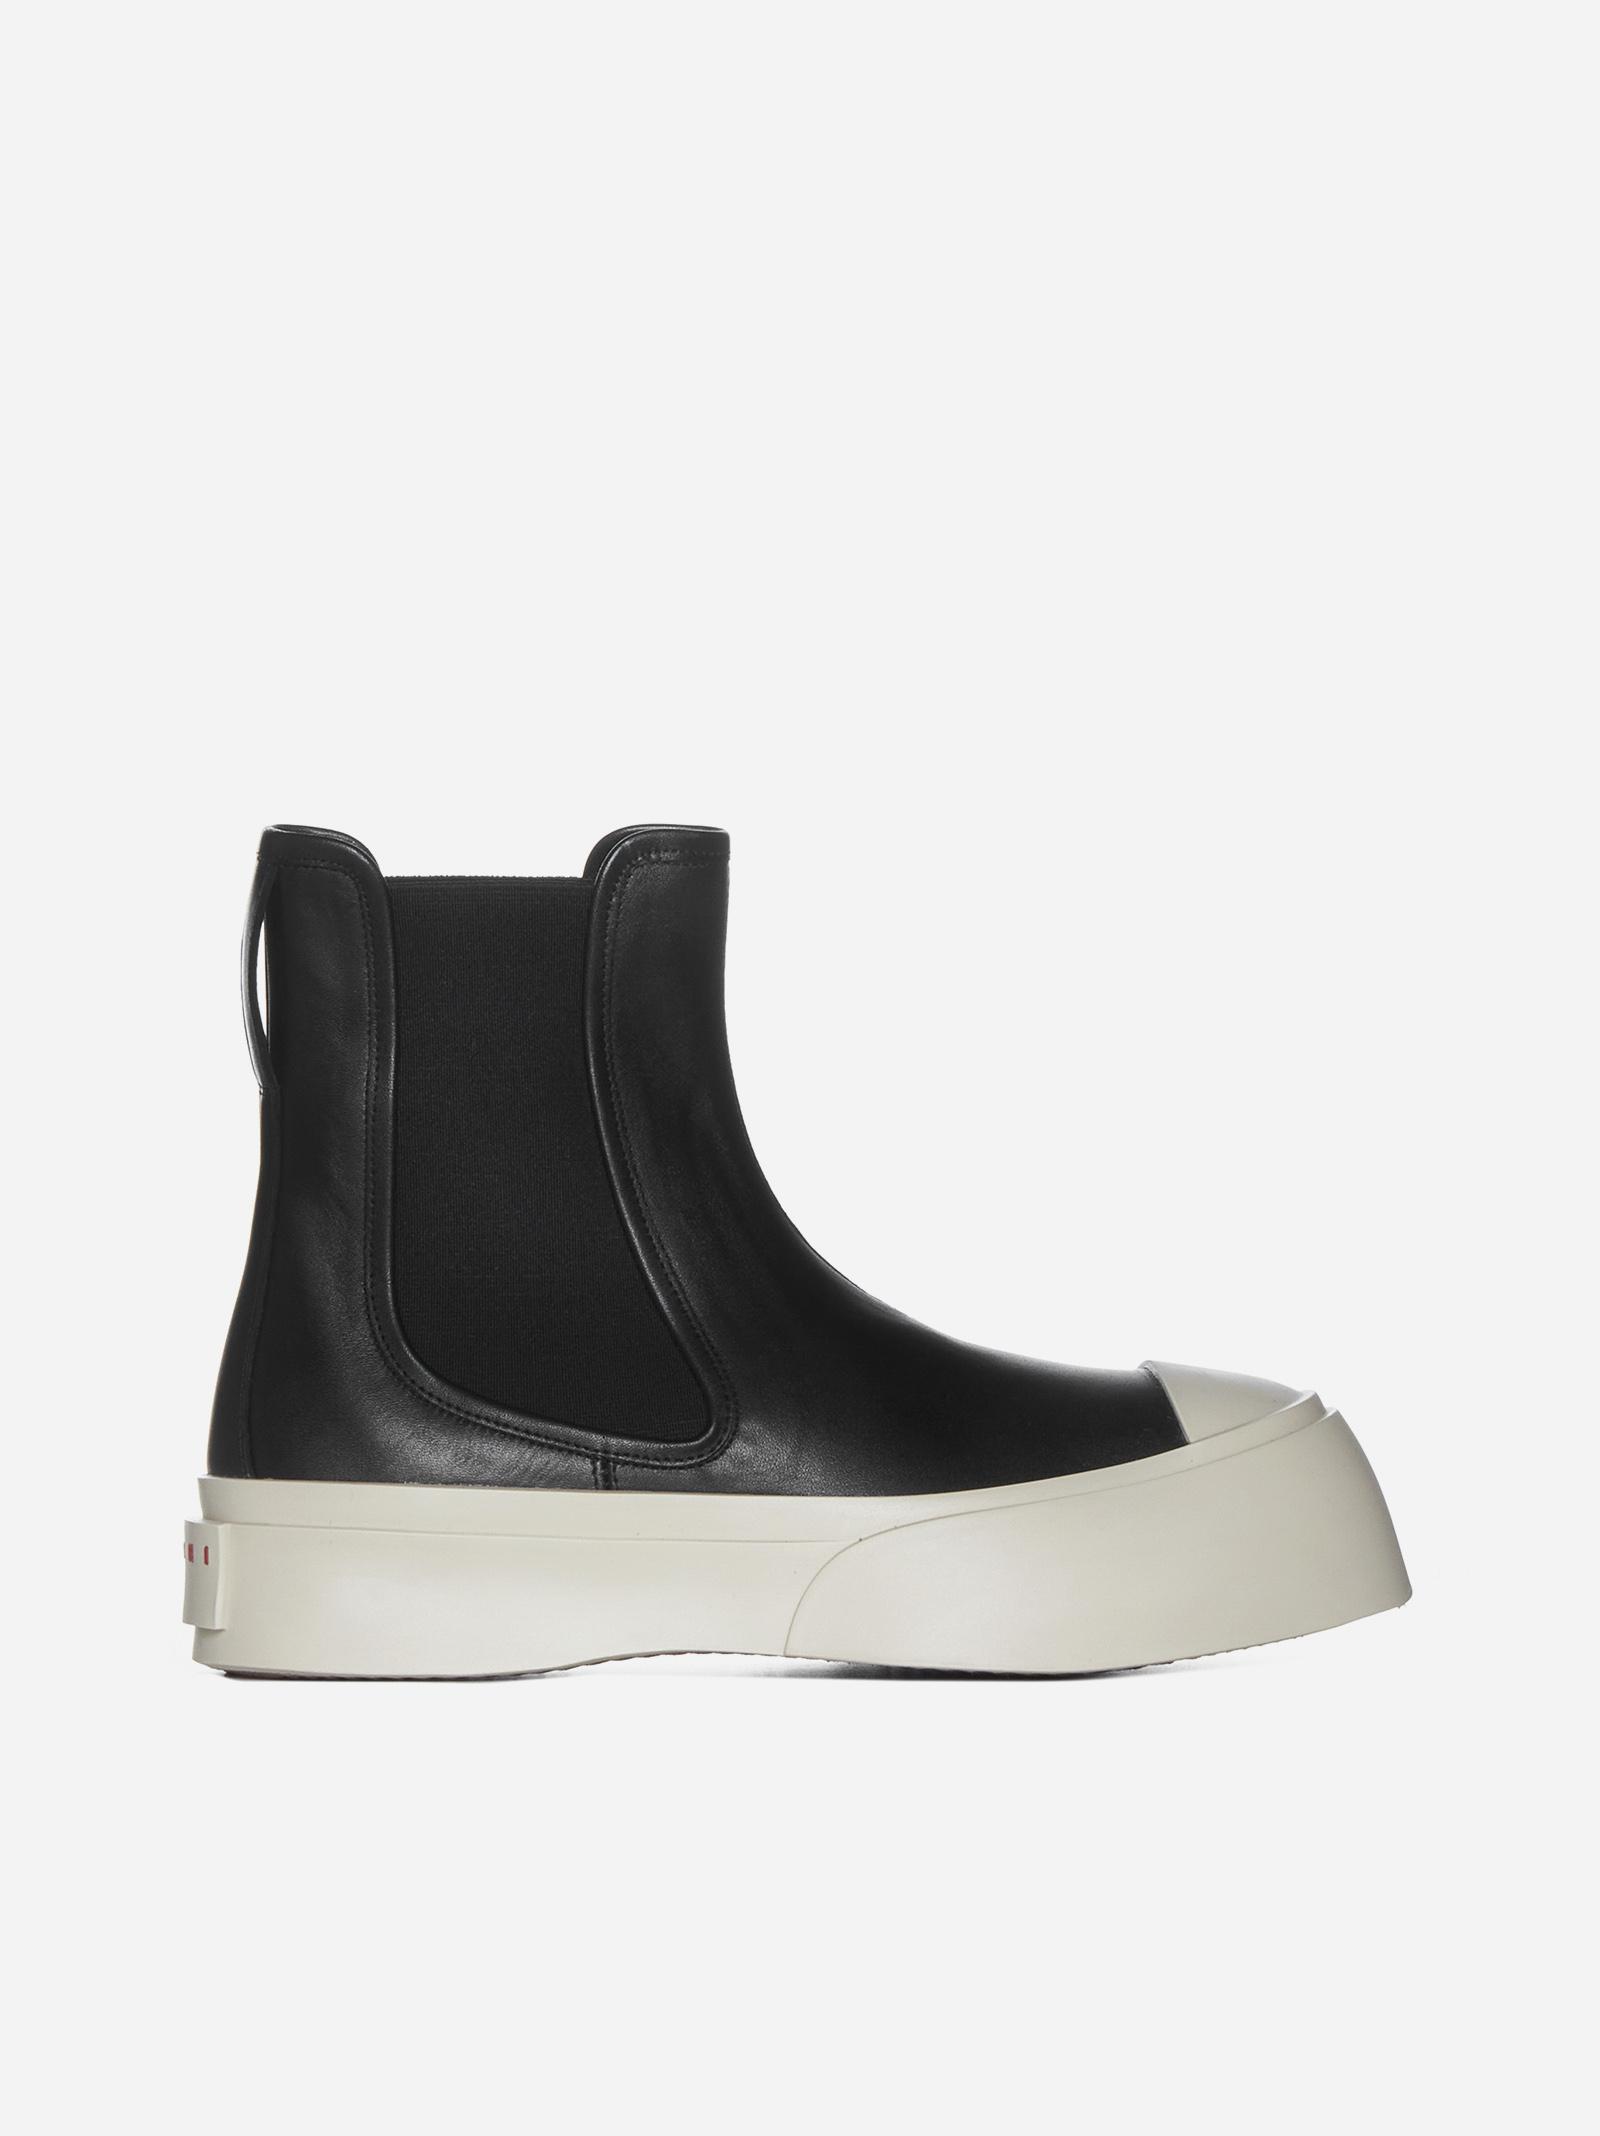 Marni Pablo Chelsea Leather Boots in Black | Lyst